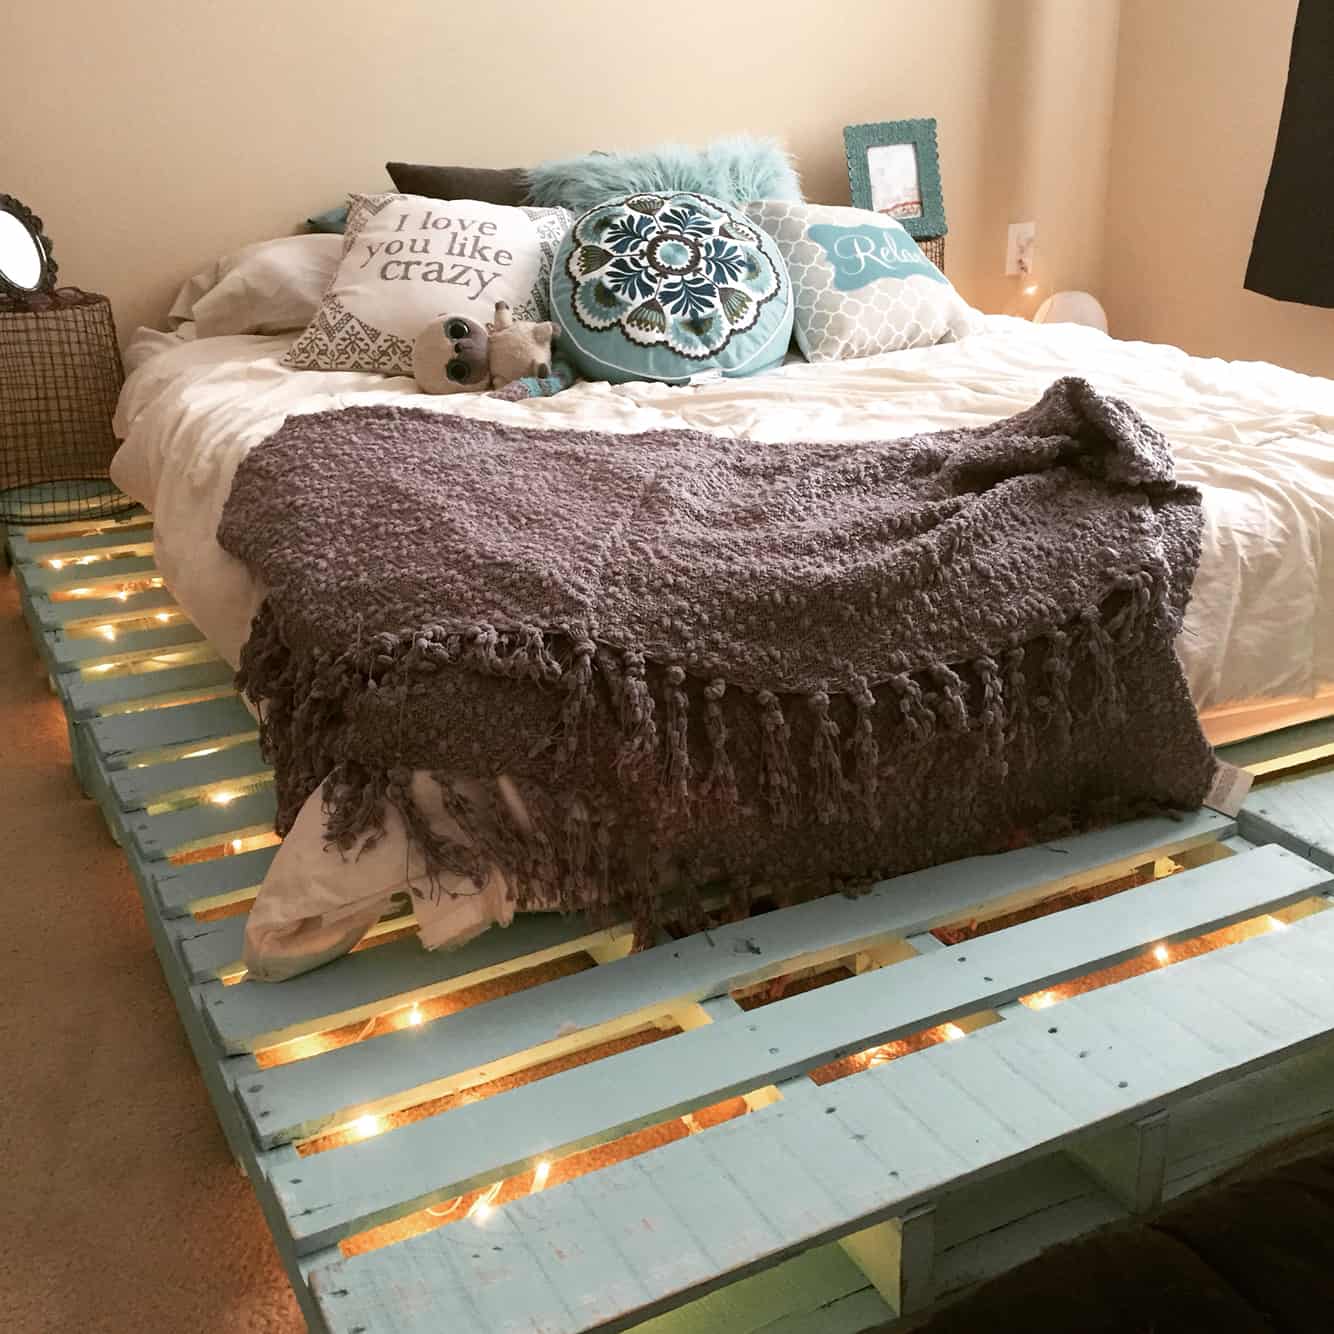 7. DELICATE PASTEL TURQUOISE PALLET BED FRAME LIT BY STRING LIGHTS